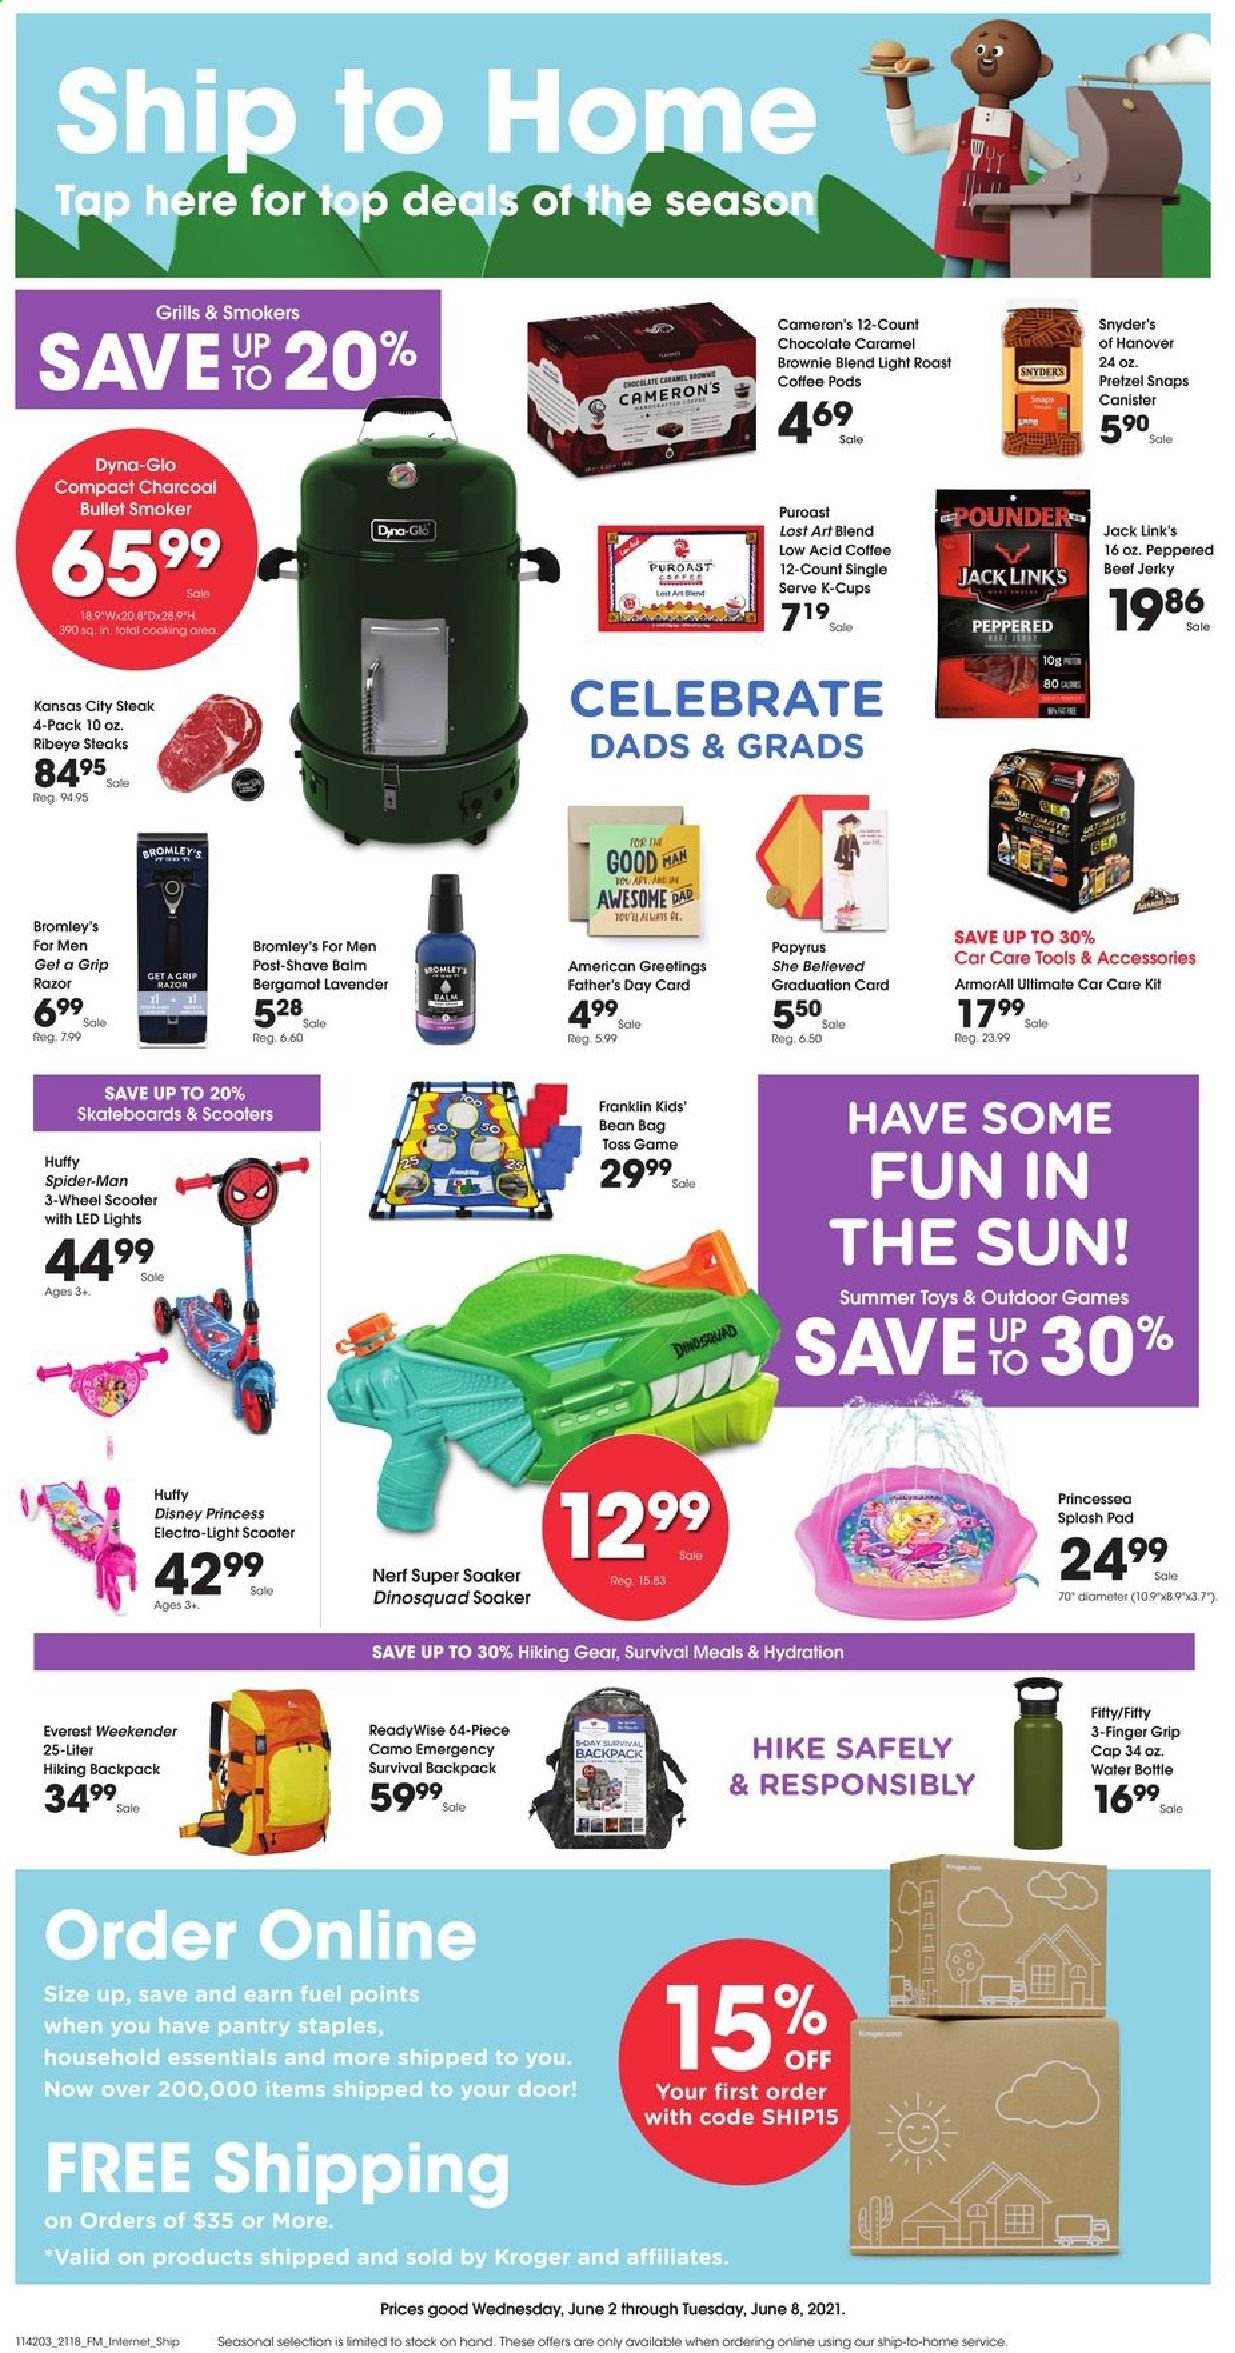 thumbnail - Kroger Flyer - 06/02/2021 - 06/08/2021 - Sales products - bean bag, pretzels, brownies, beef jerky, jerky, chocolate, Jack Link's, caramel, coffee pods, coffee capsules, K-Cups, beef meat, steak, ribeye steak, Disney, razor, canister, drink bottle, Nerf, cap, backpack, Toss game, soaker, princess, LED light, tools & accessories, charcoal. Page 10.